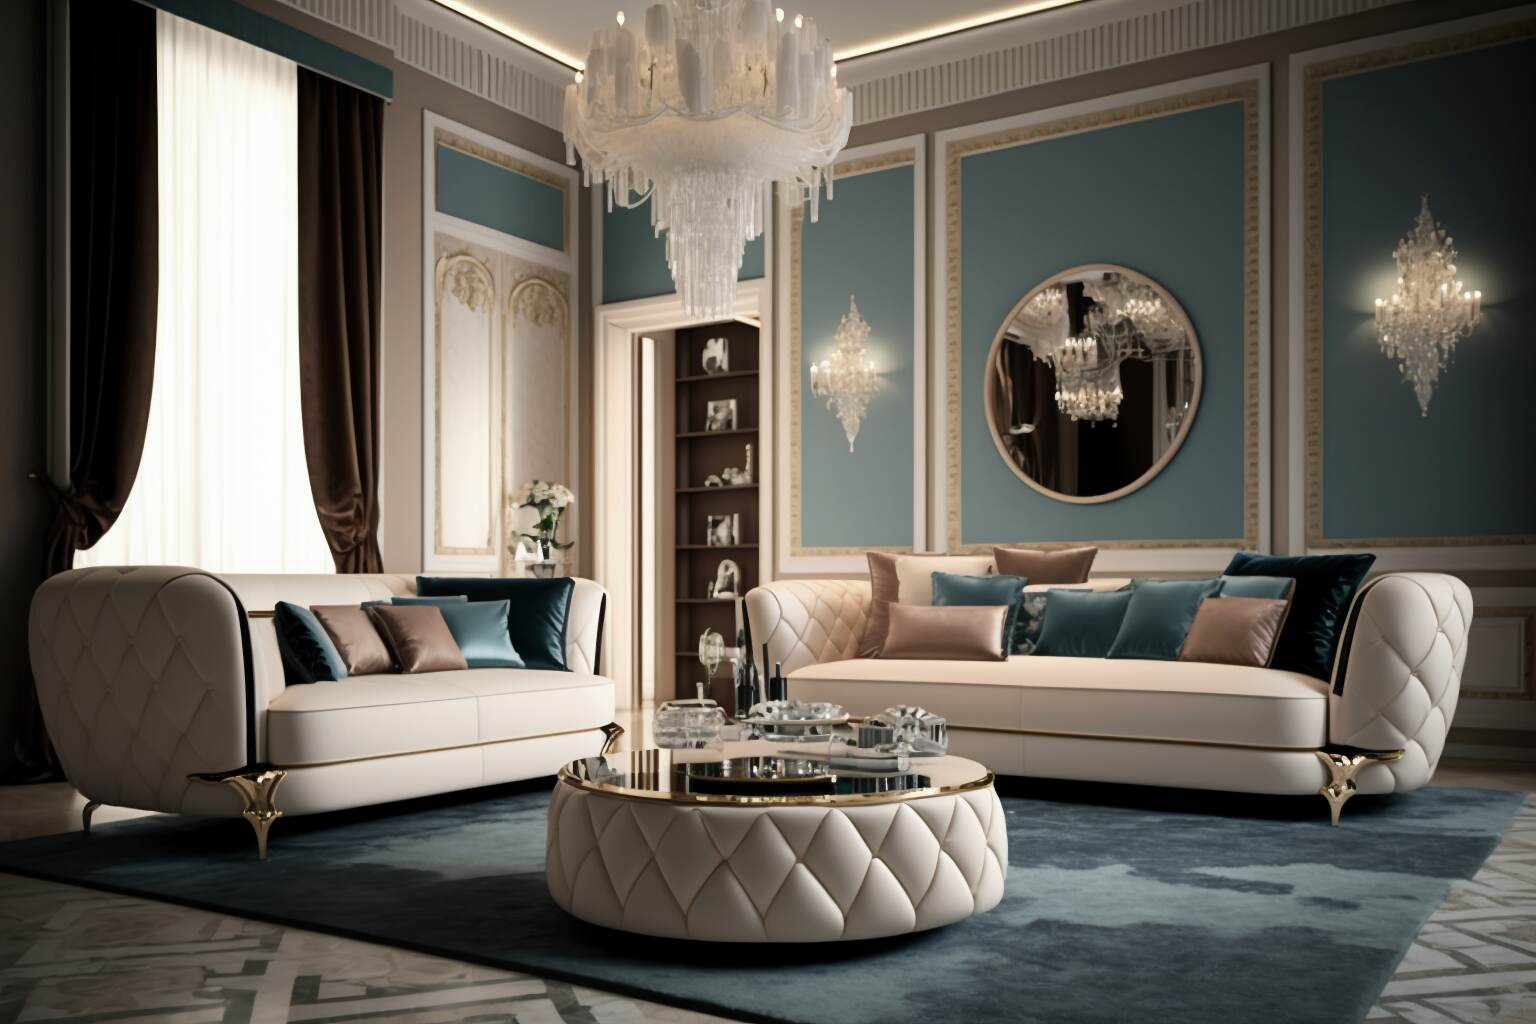 A Luxurious Living Room Adorned With A Stunning Italian Brand Vistosi Chandelier